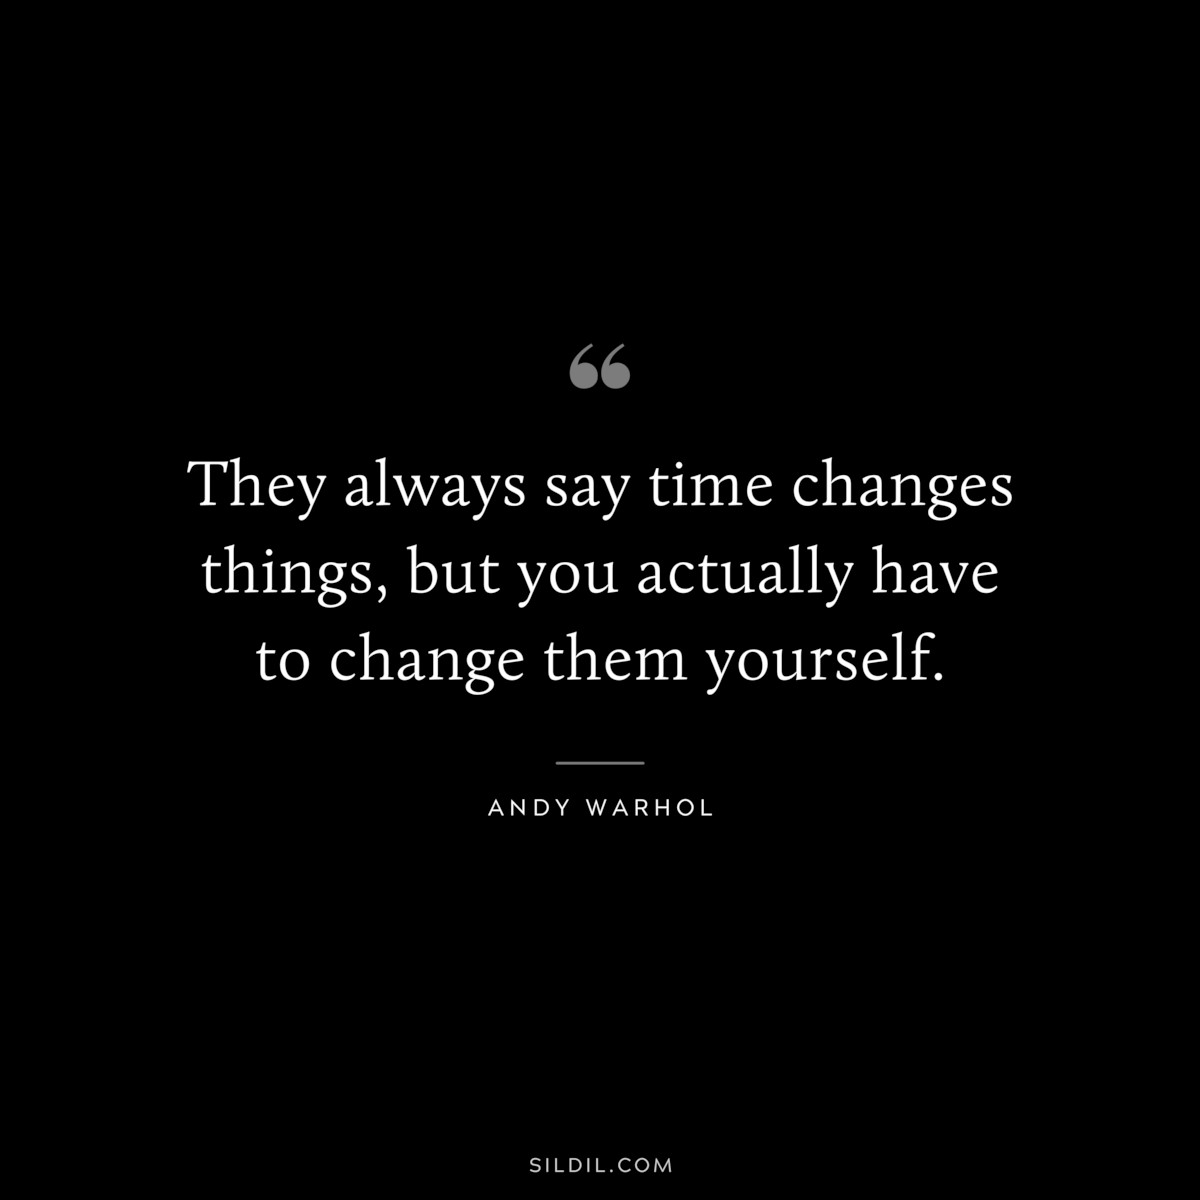 They always say time changes things, but you actually have to change them yourself. ― Andy Warhol